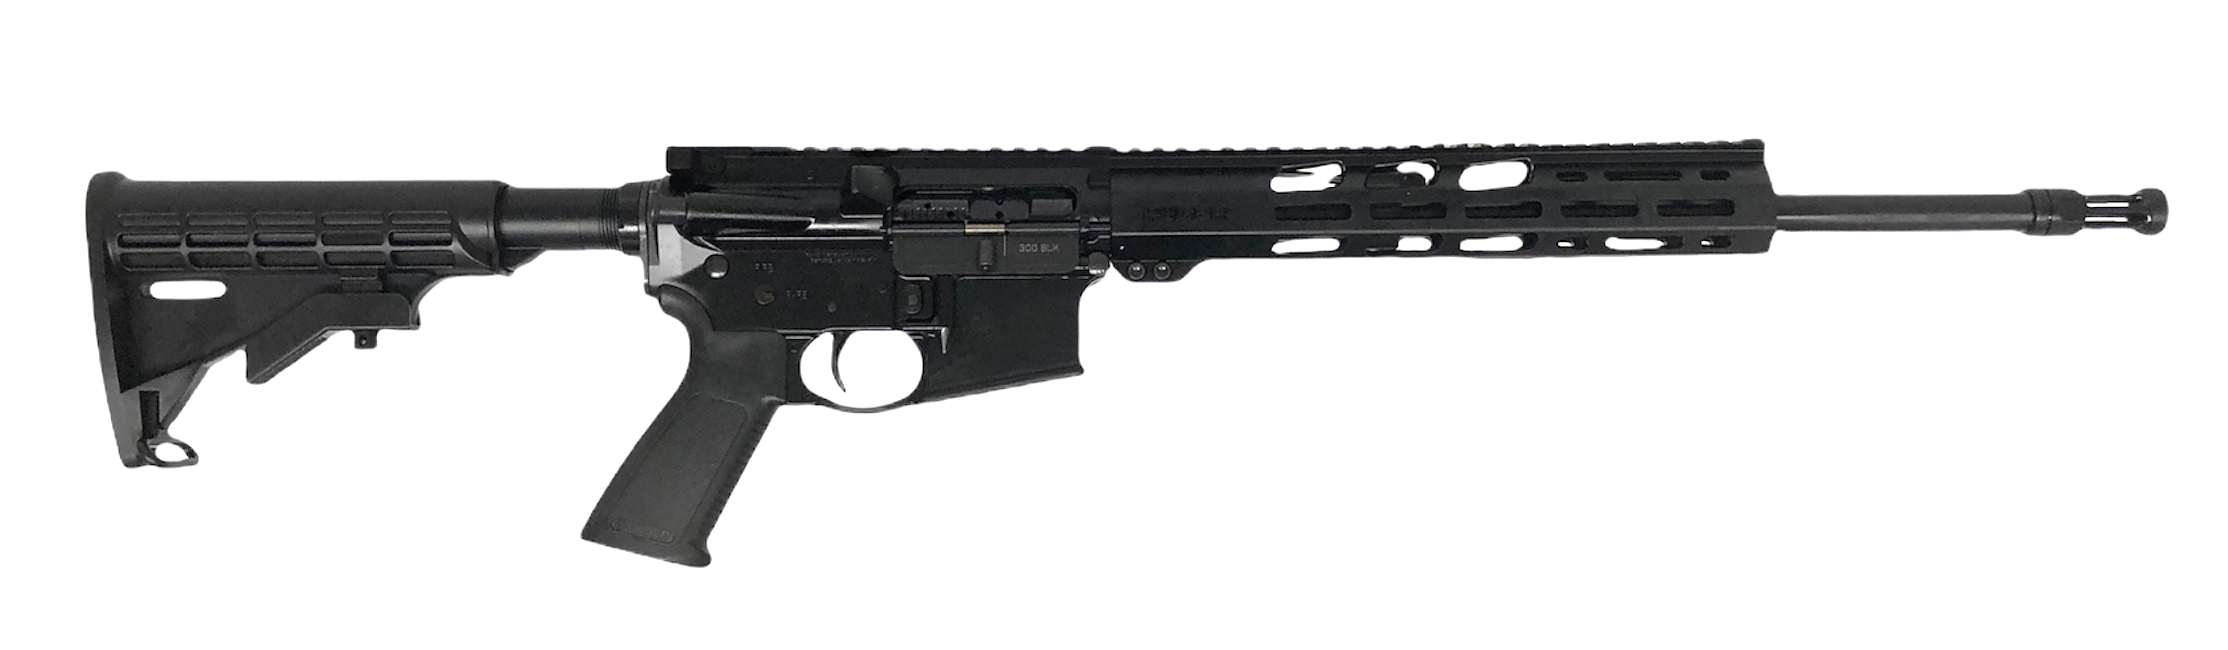 Ruger AR-556 .300 Blackout Semi-Automatic Rifle-img-4